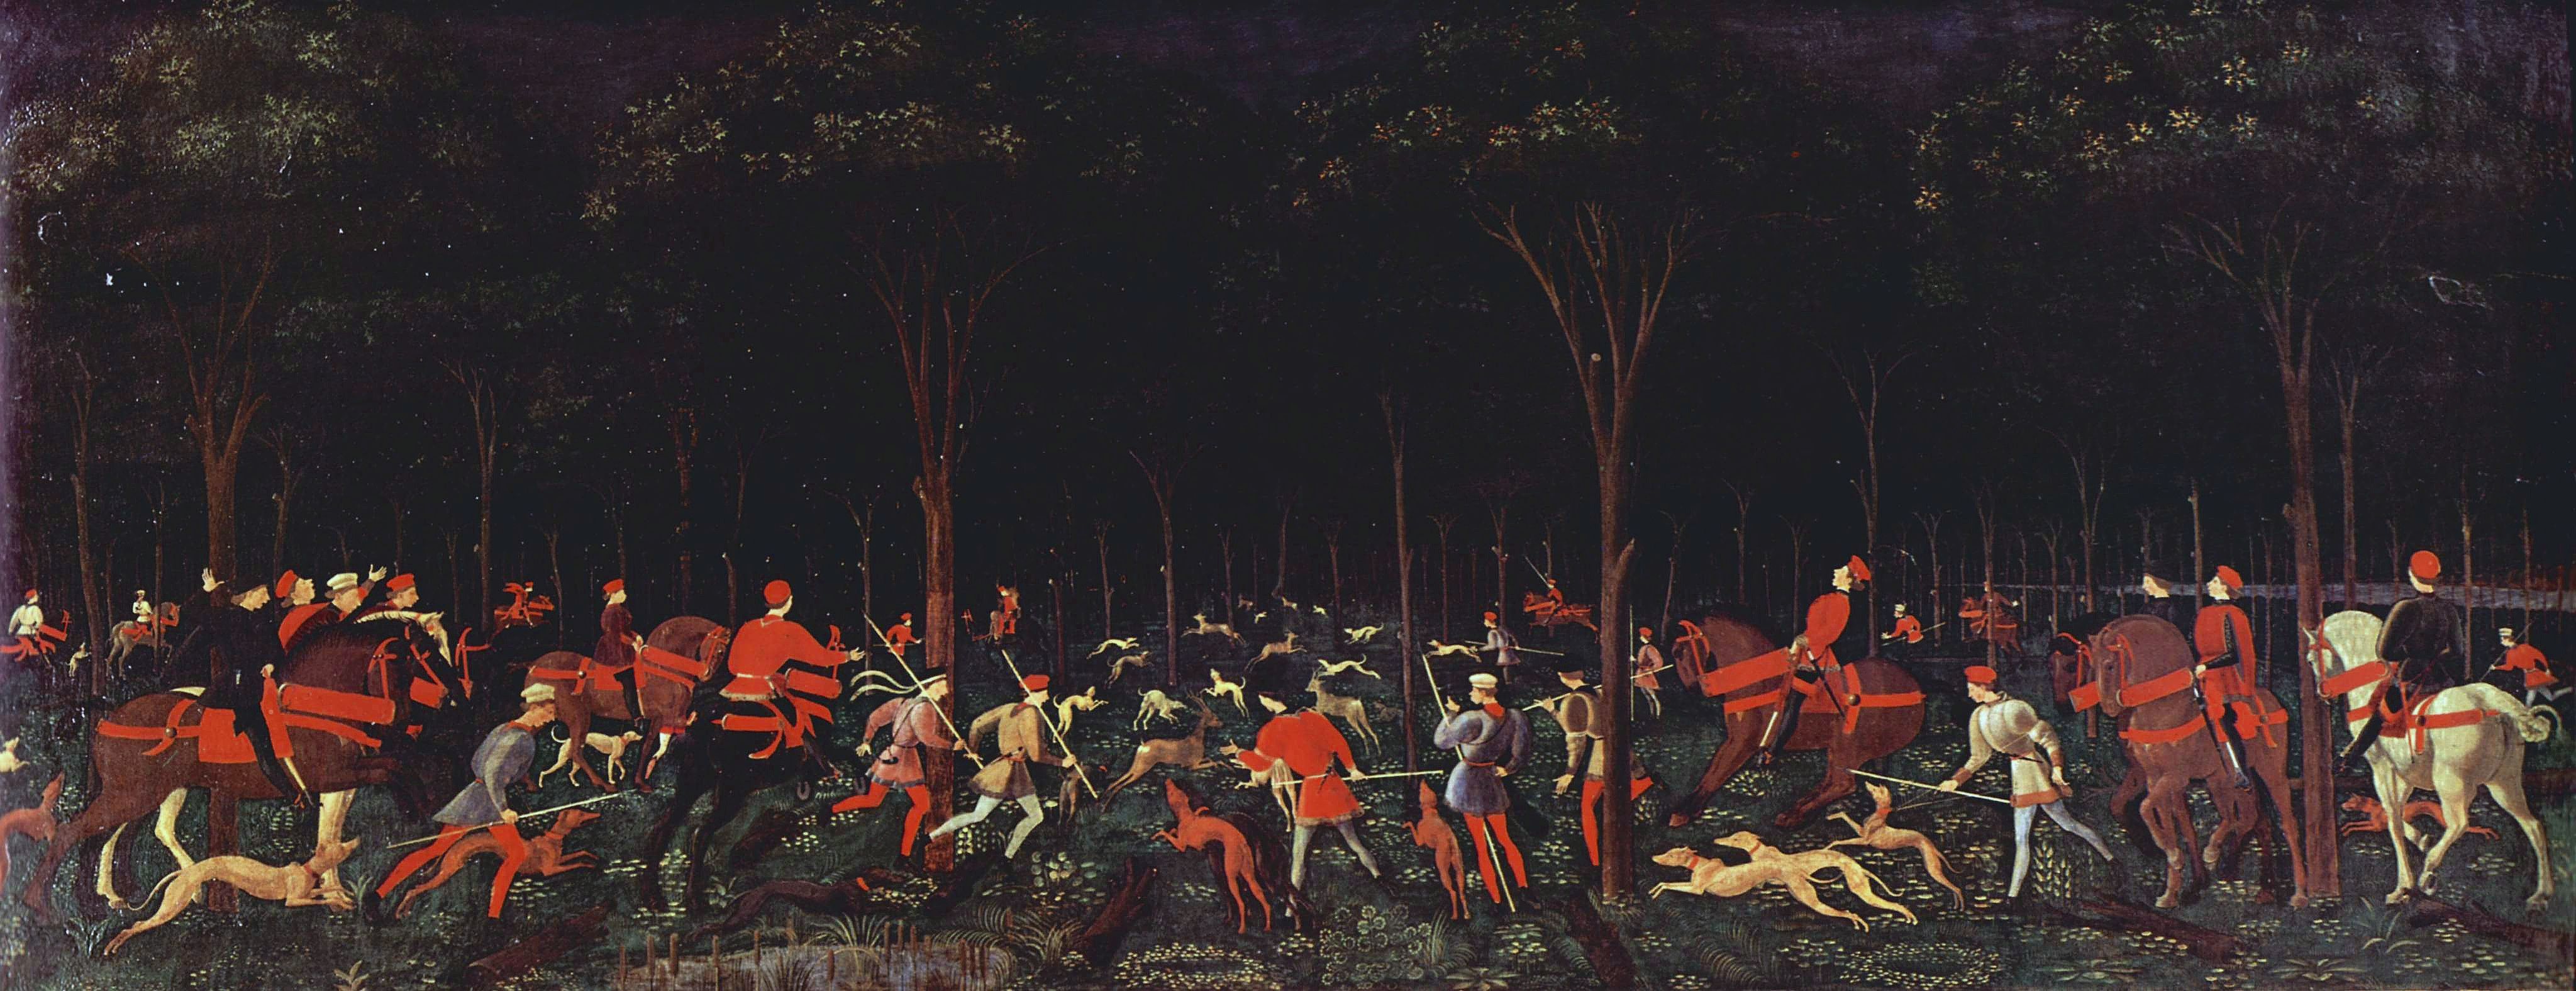 paolo uccello the hunt